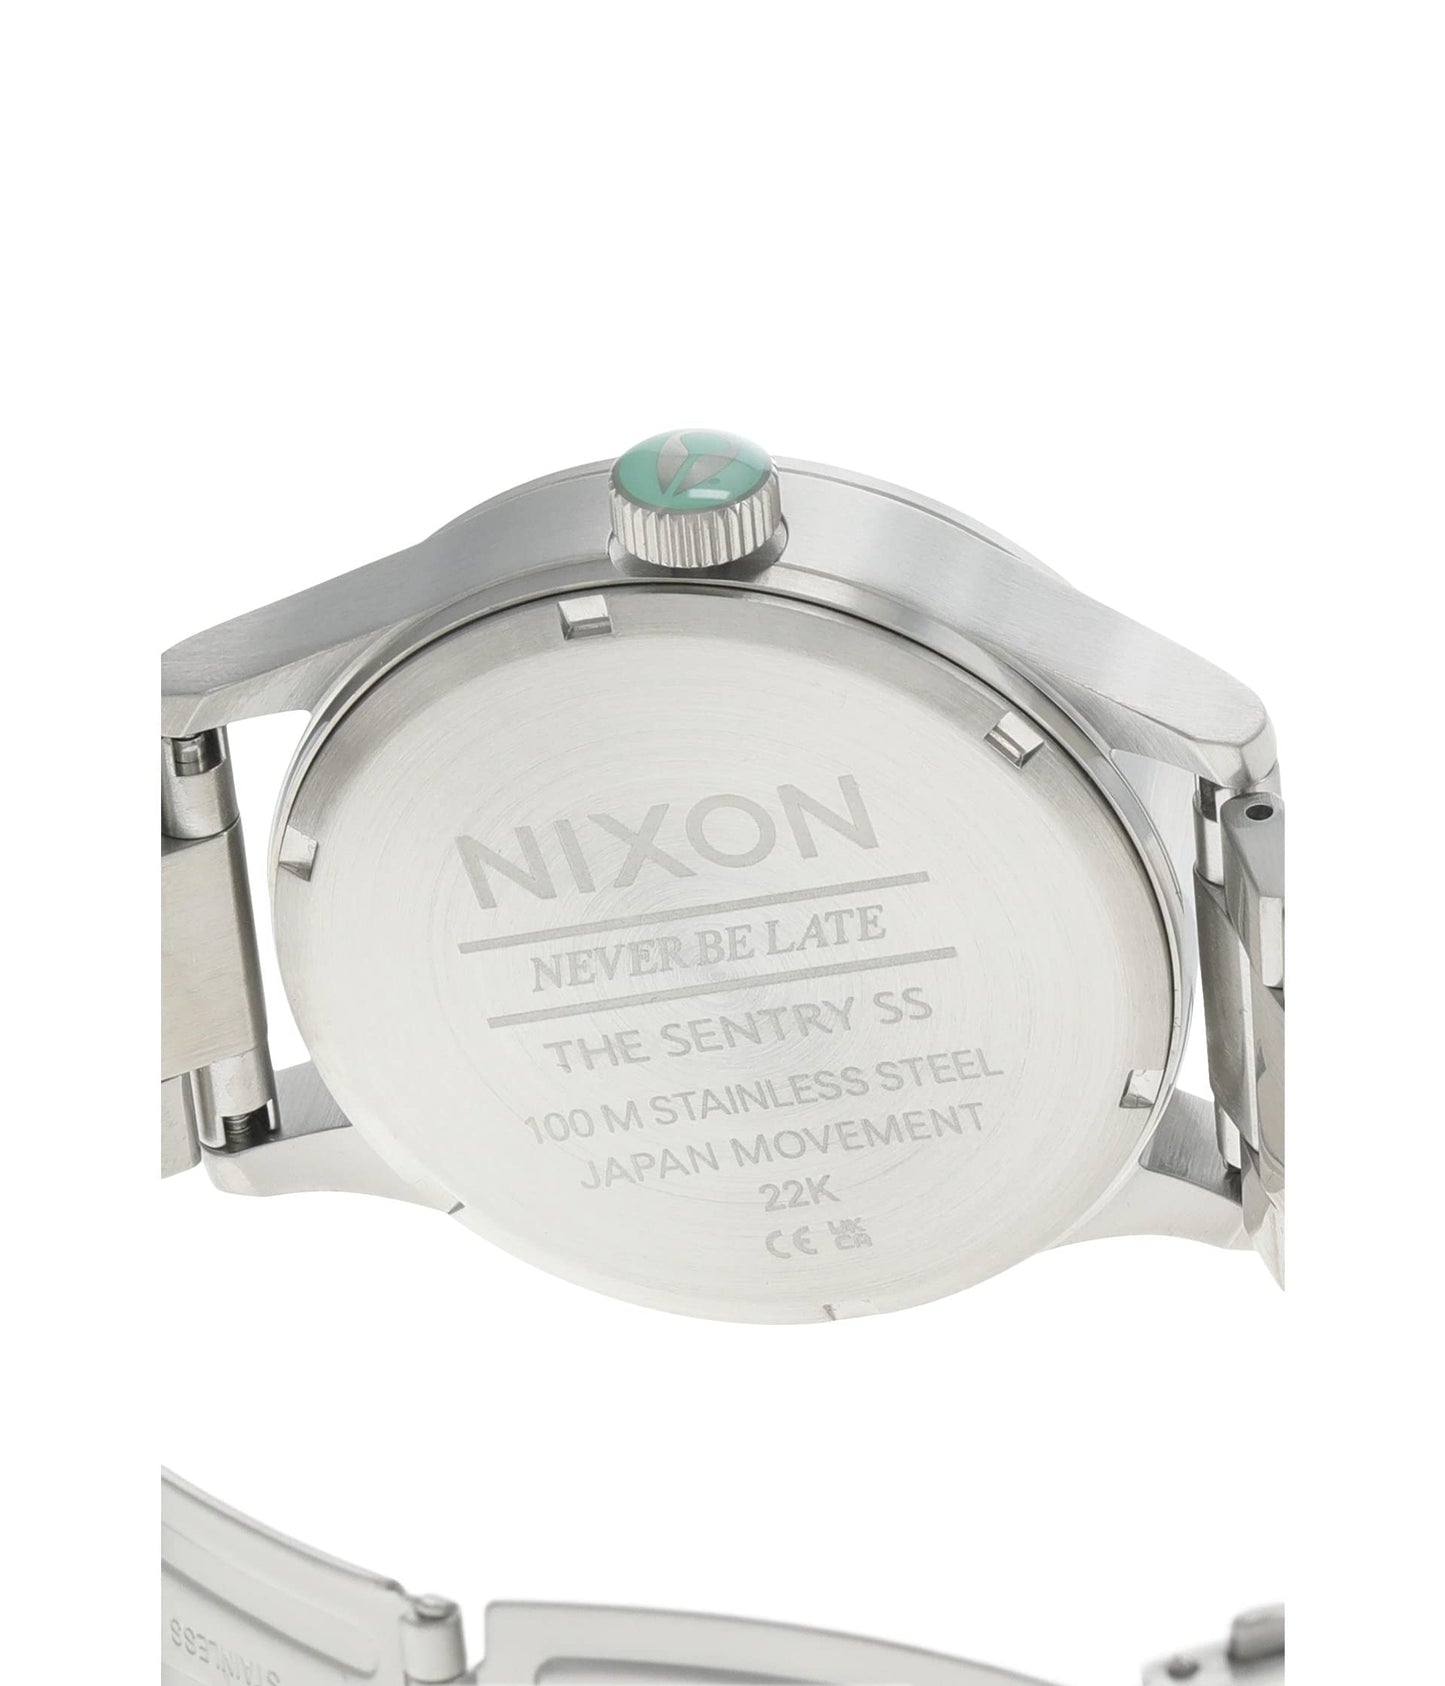 NIXON Sentry SS A356 - Silver/Turquoise - 100m Water Resistant Men's Analog Classic Watch (42mm Watch Face, 23mm-20mm Stainless Steel Band)